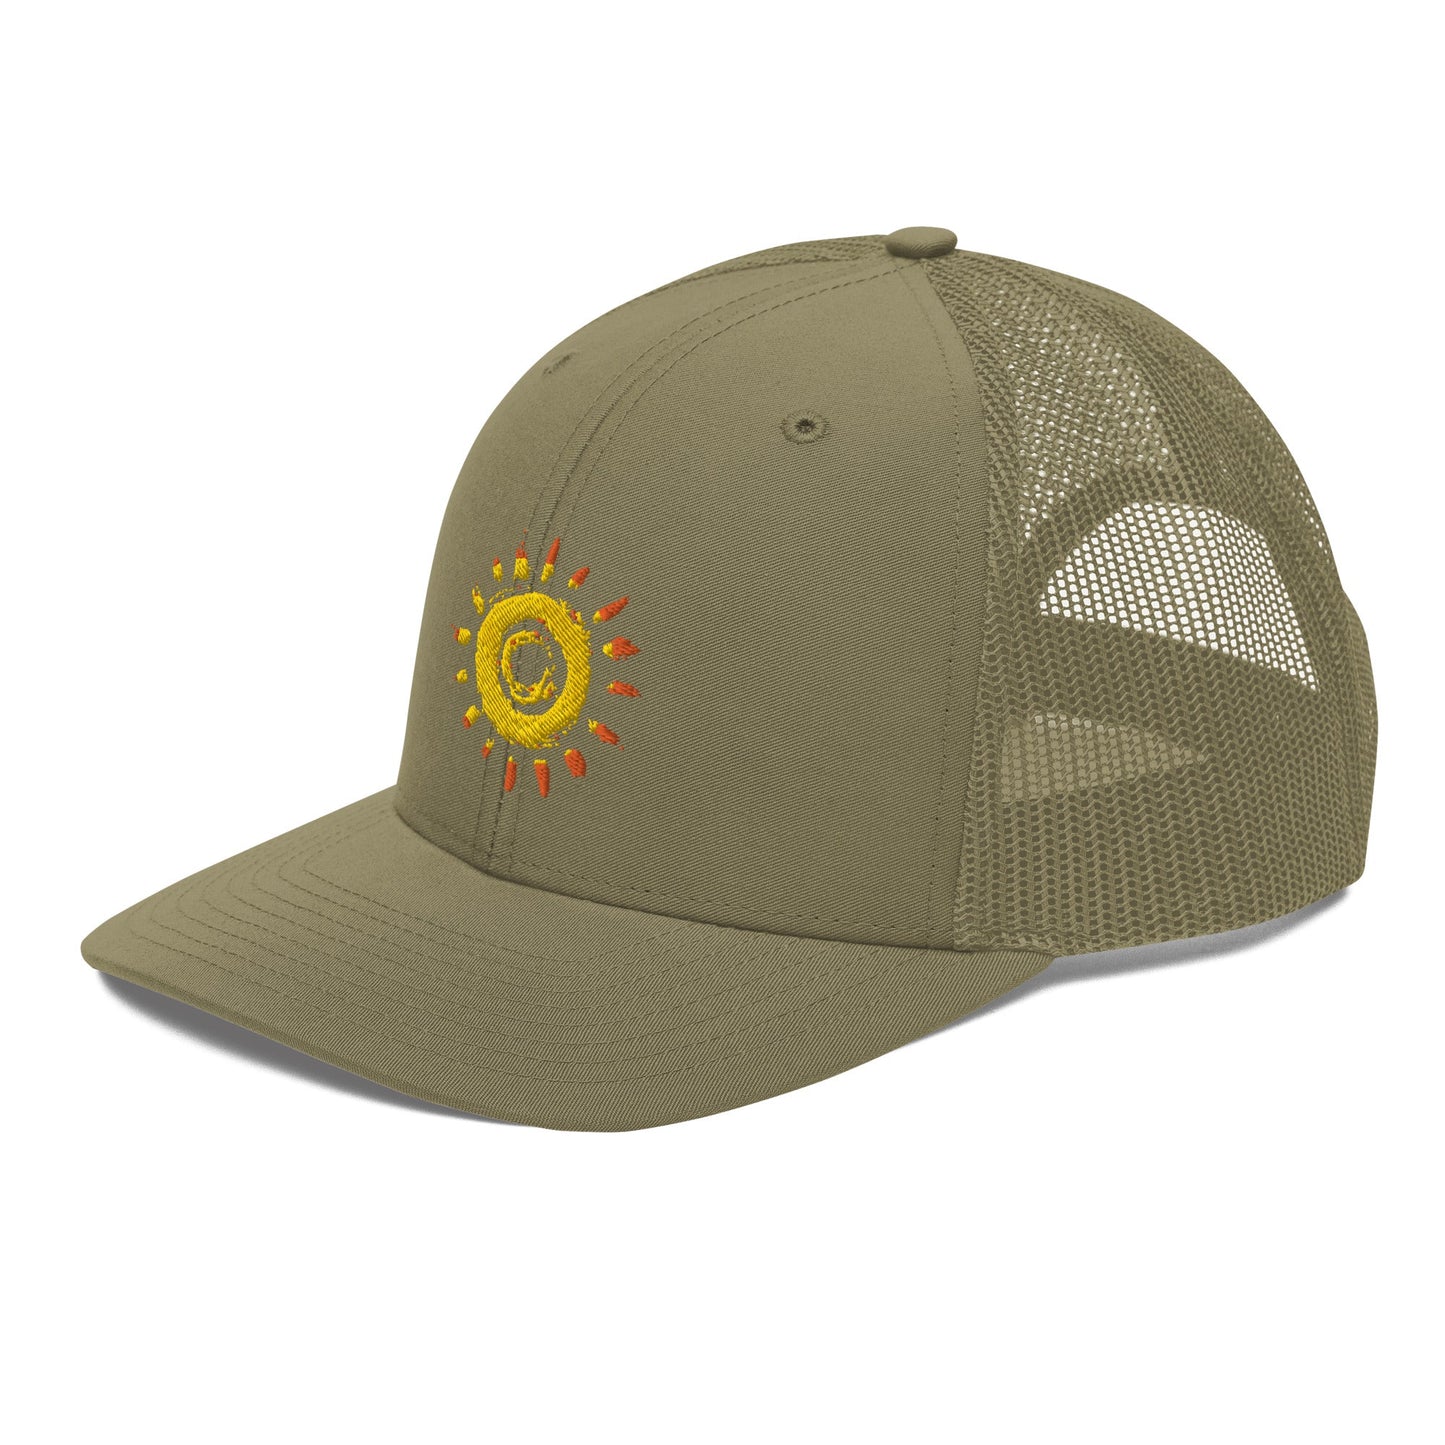 SUNZOUT BRAND EMBROIDERED HAT - Sunzout Outdoor Spaces LLC